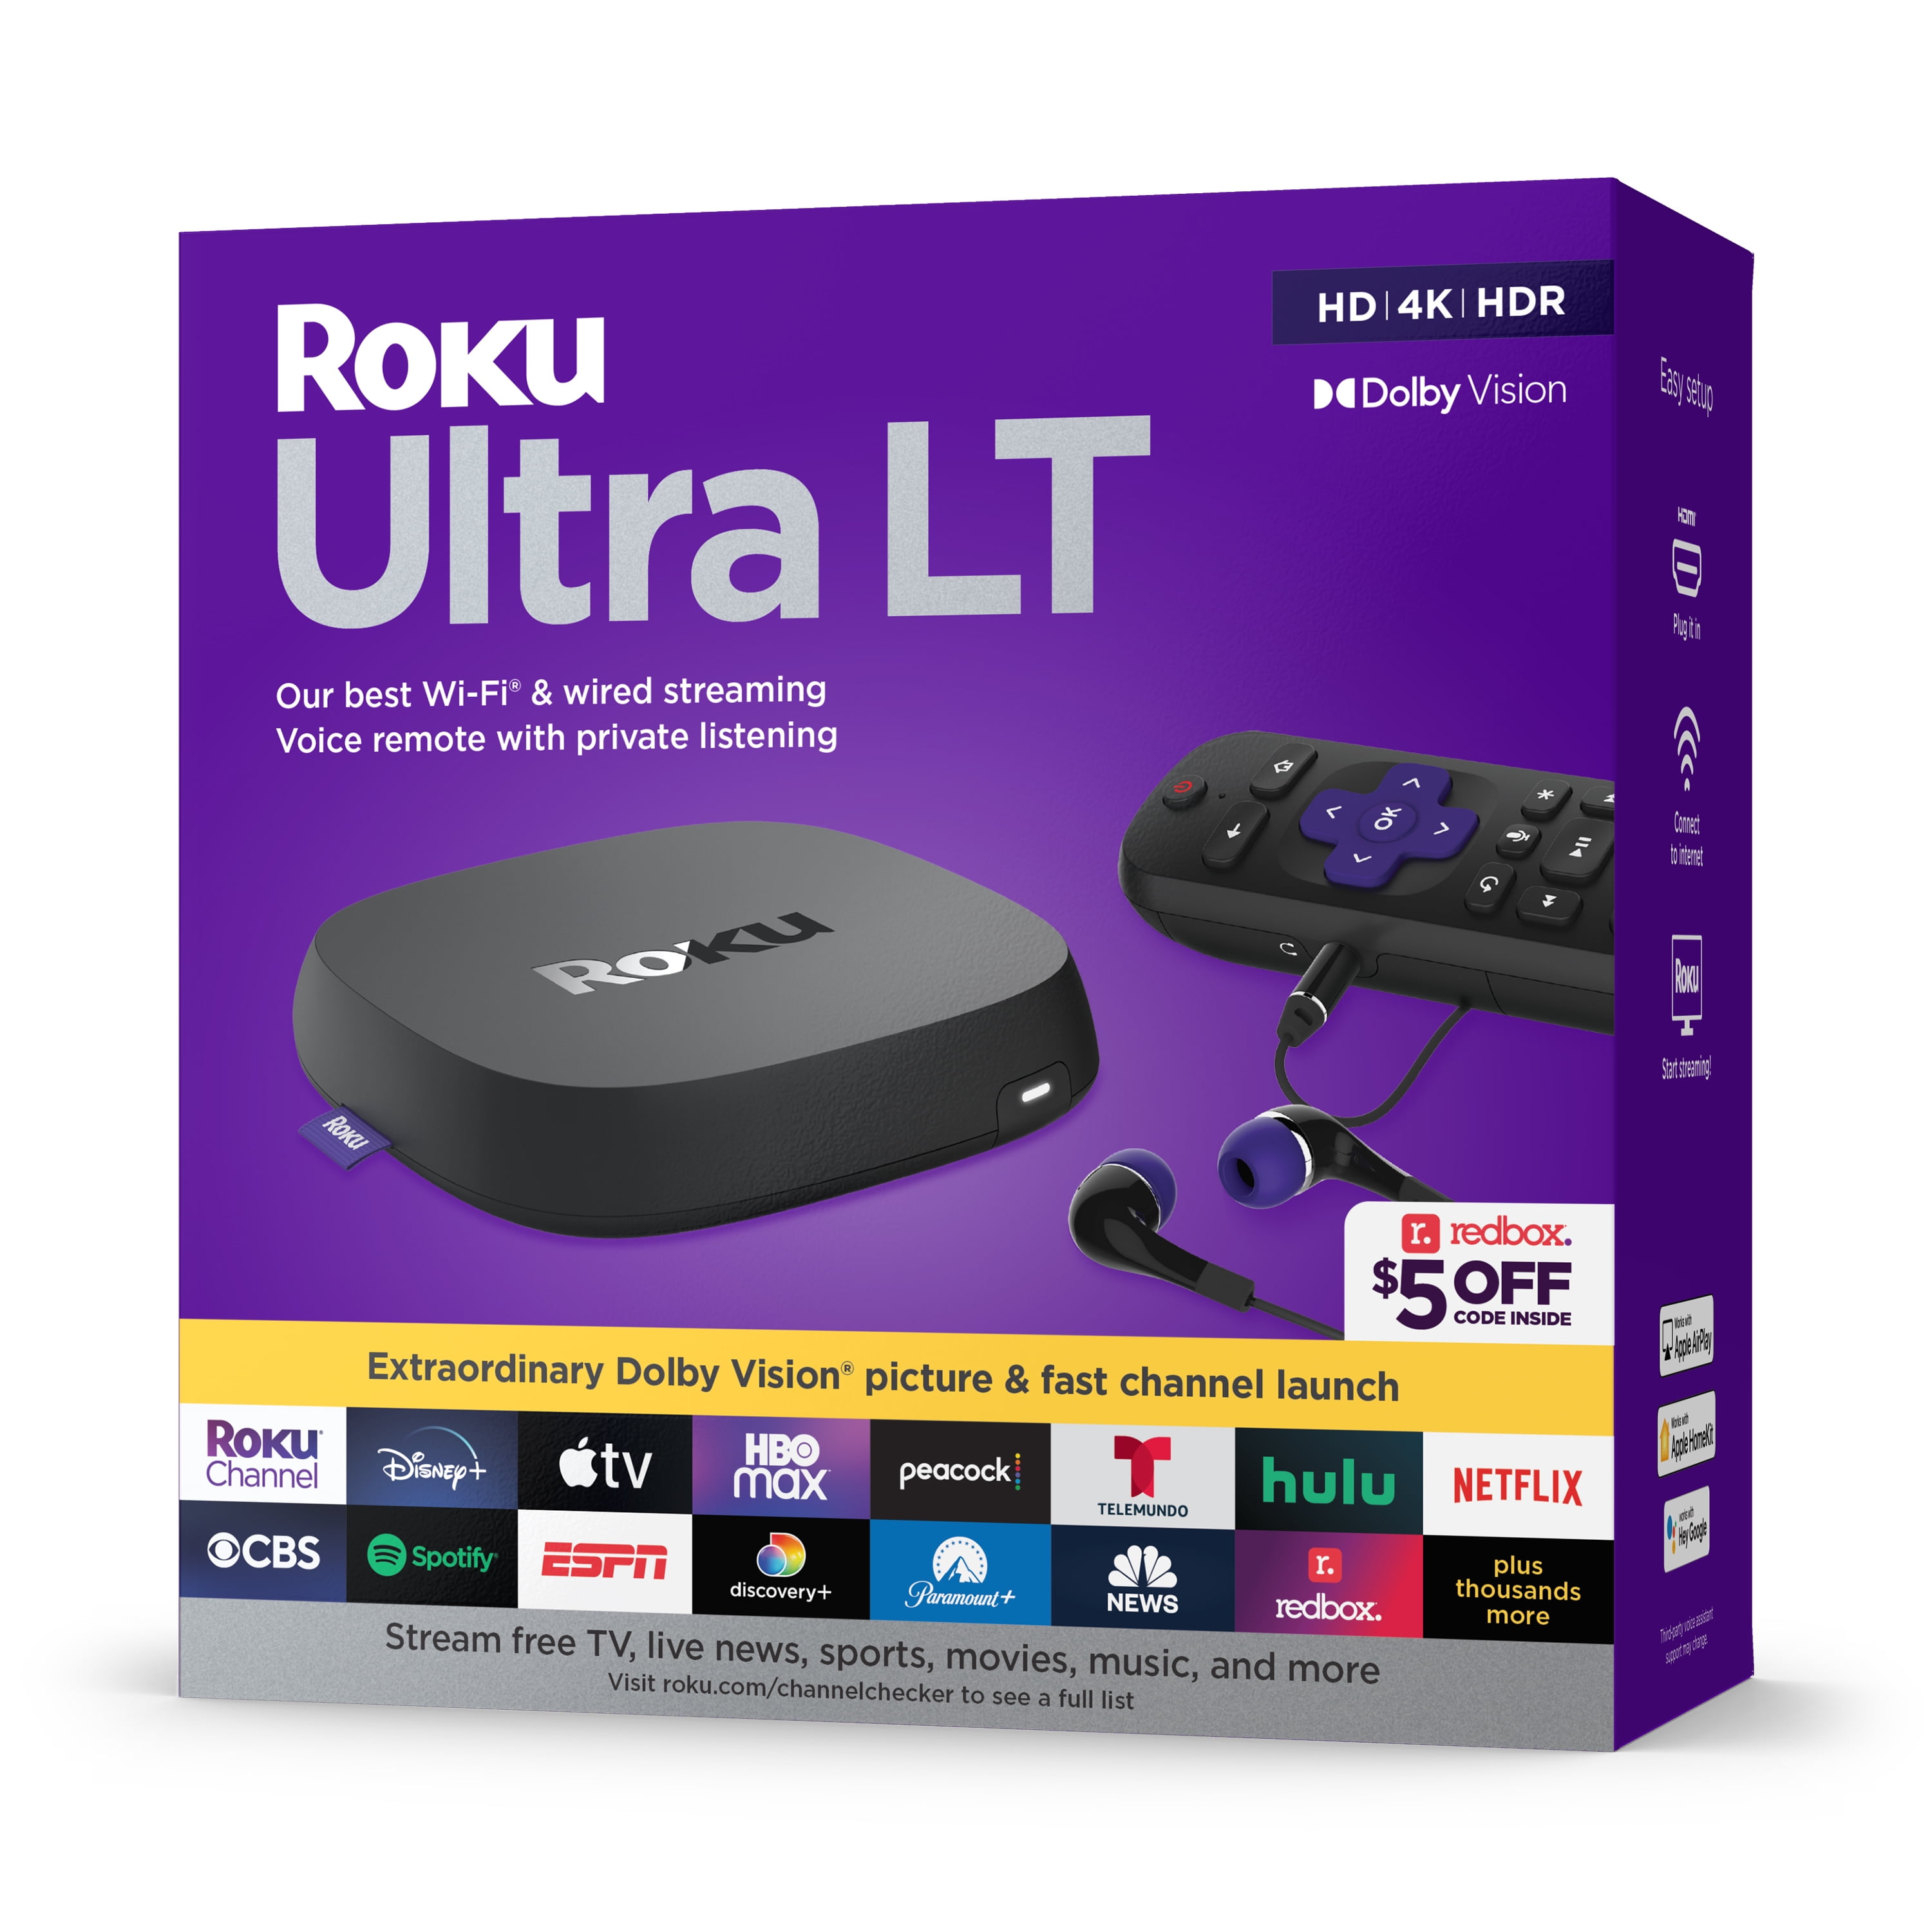 Roku Ultra LT Streaming Device 4K/HDR/Dolby Vision/Dual-Band Wi-Fi® with Roku Voice Remote and HDMI Cable